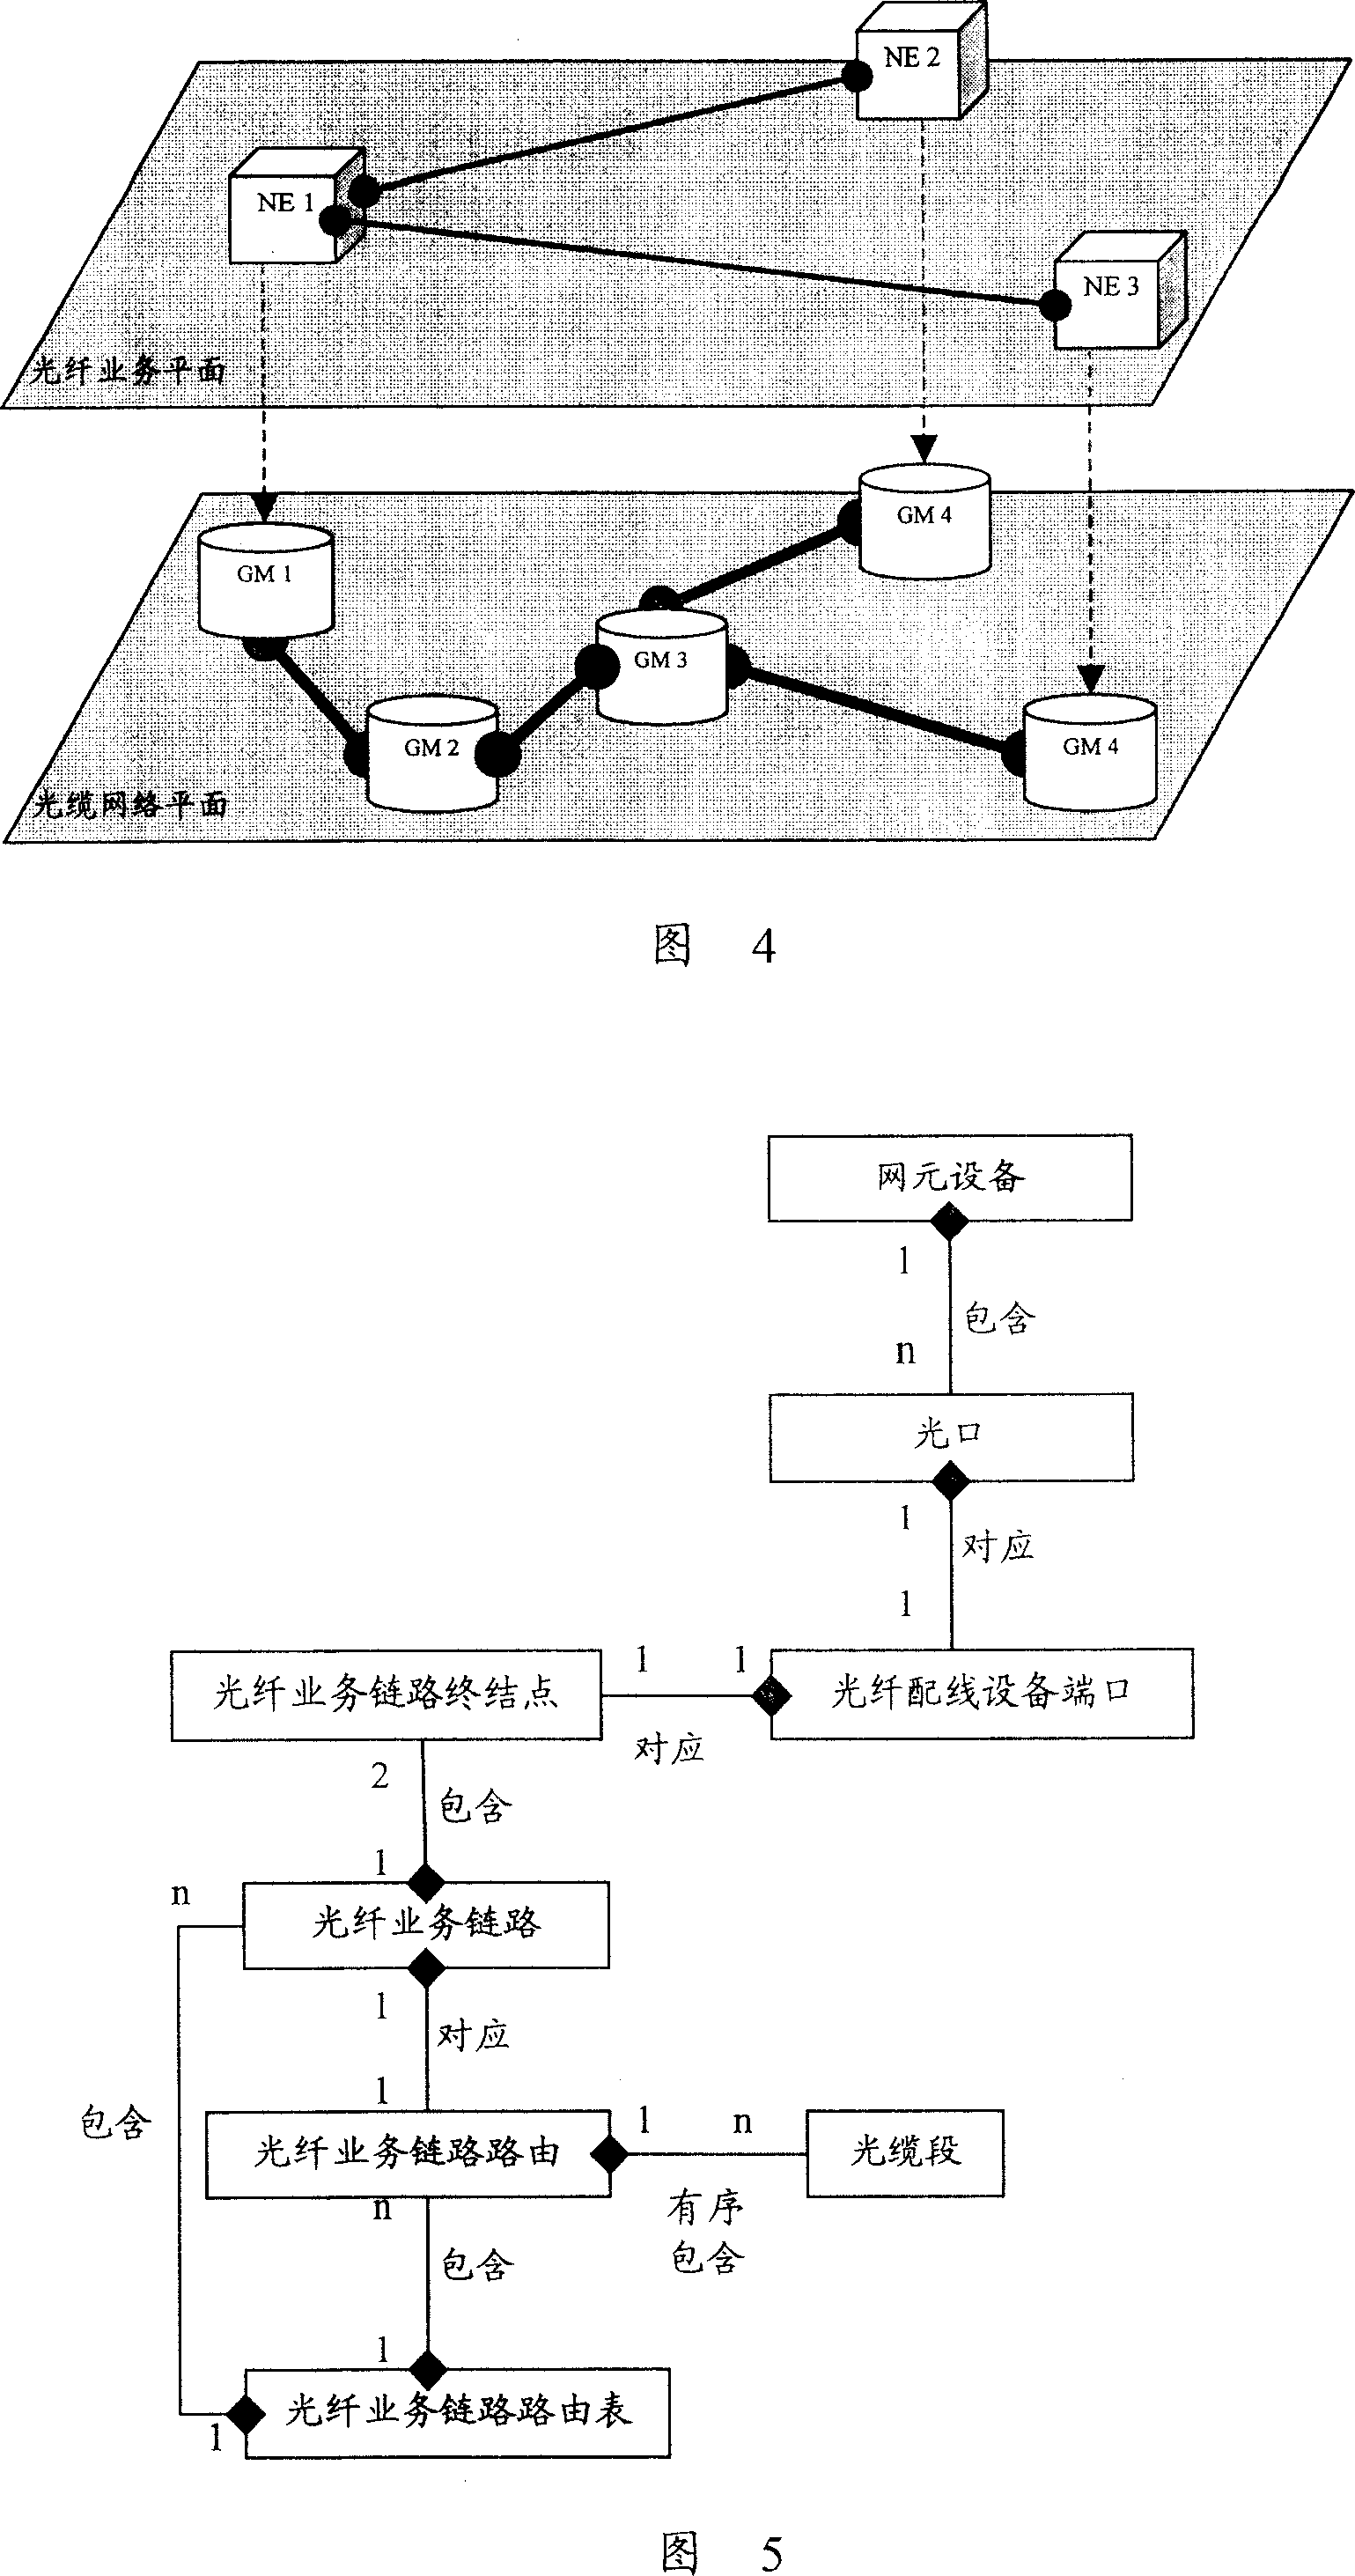 Optical fiber automatic monitoring system and method